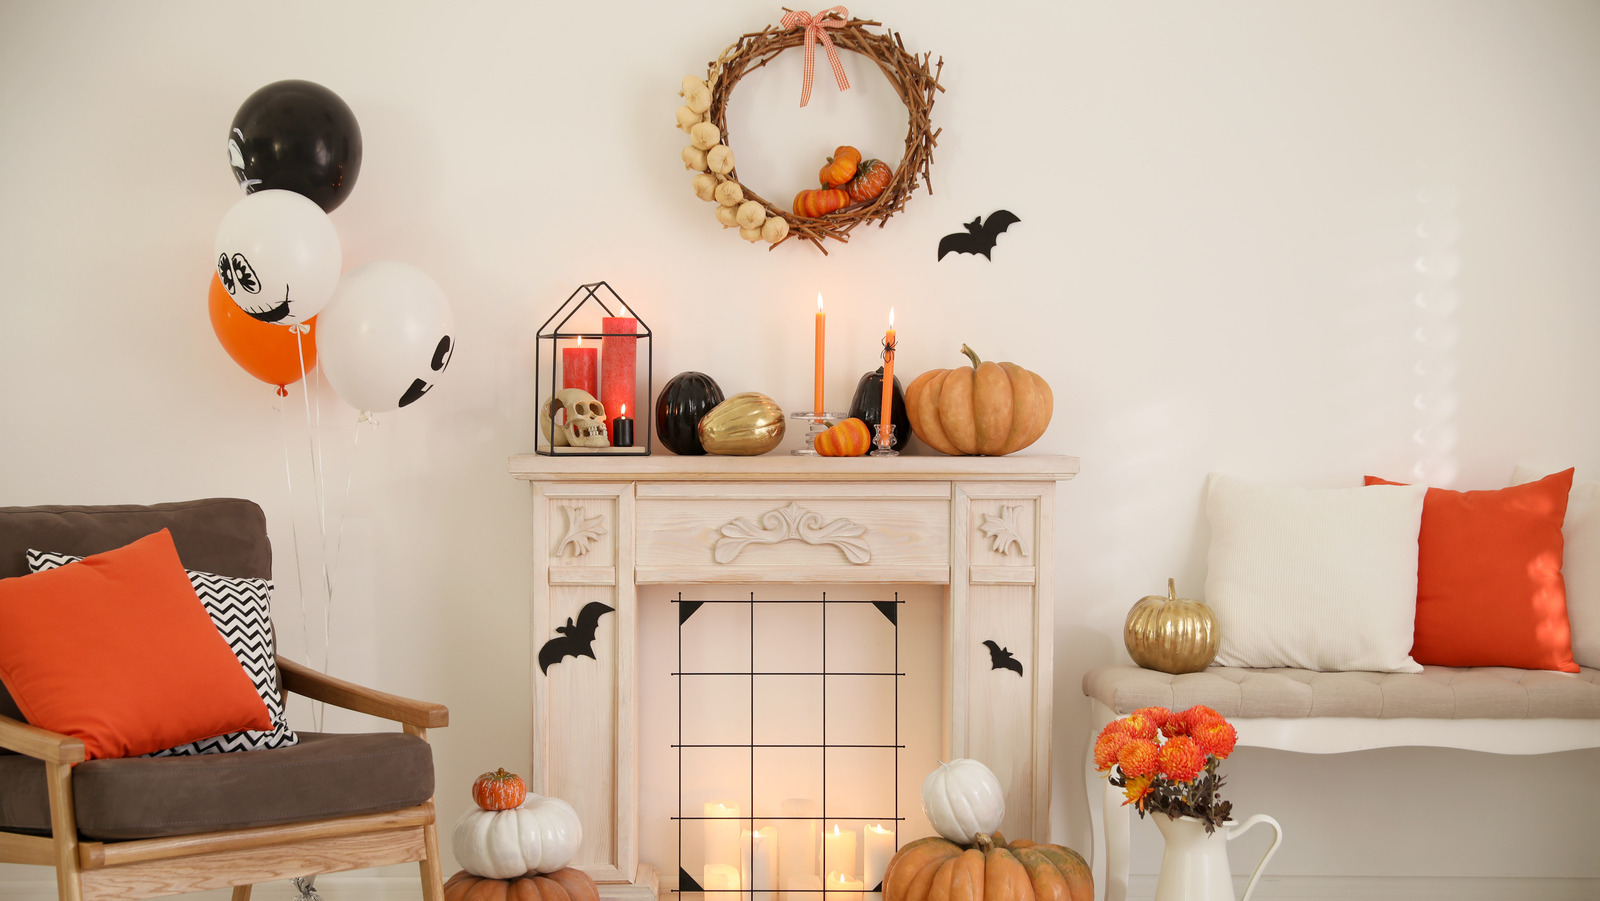 How To Decorate Your Mantel For Halloween